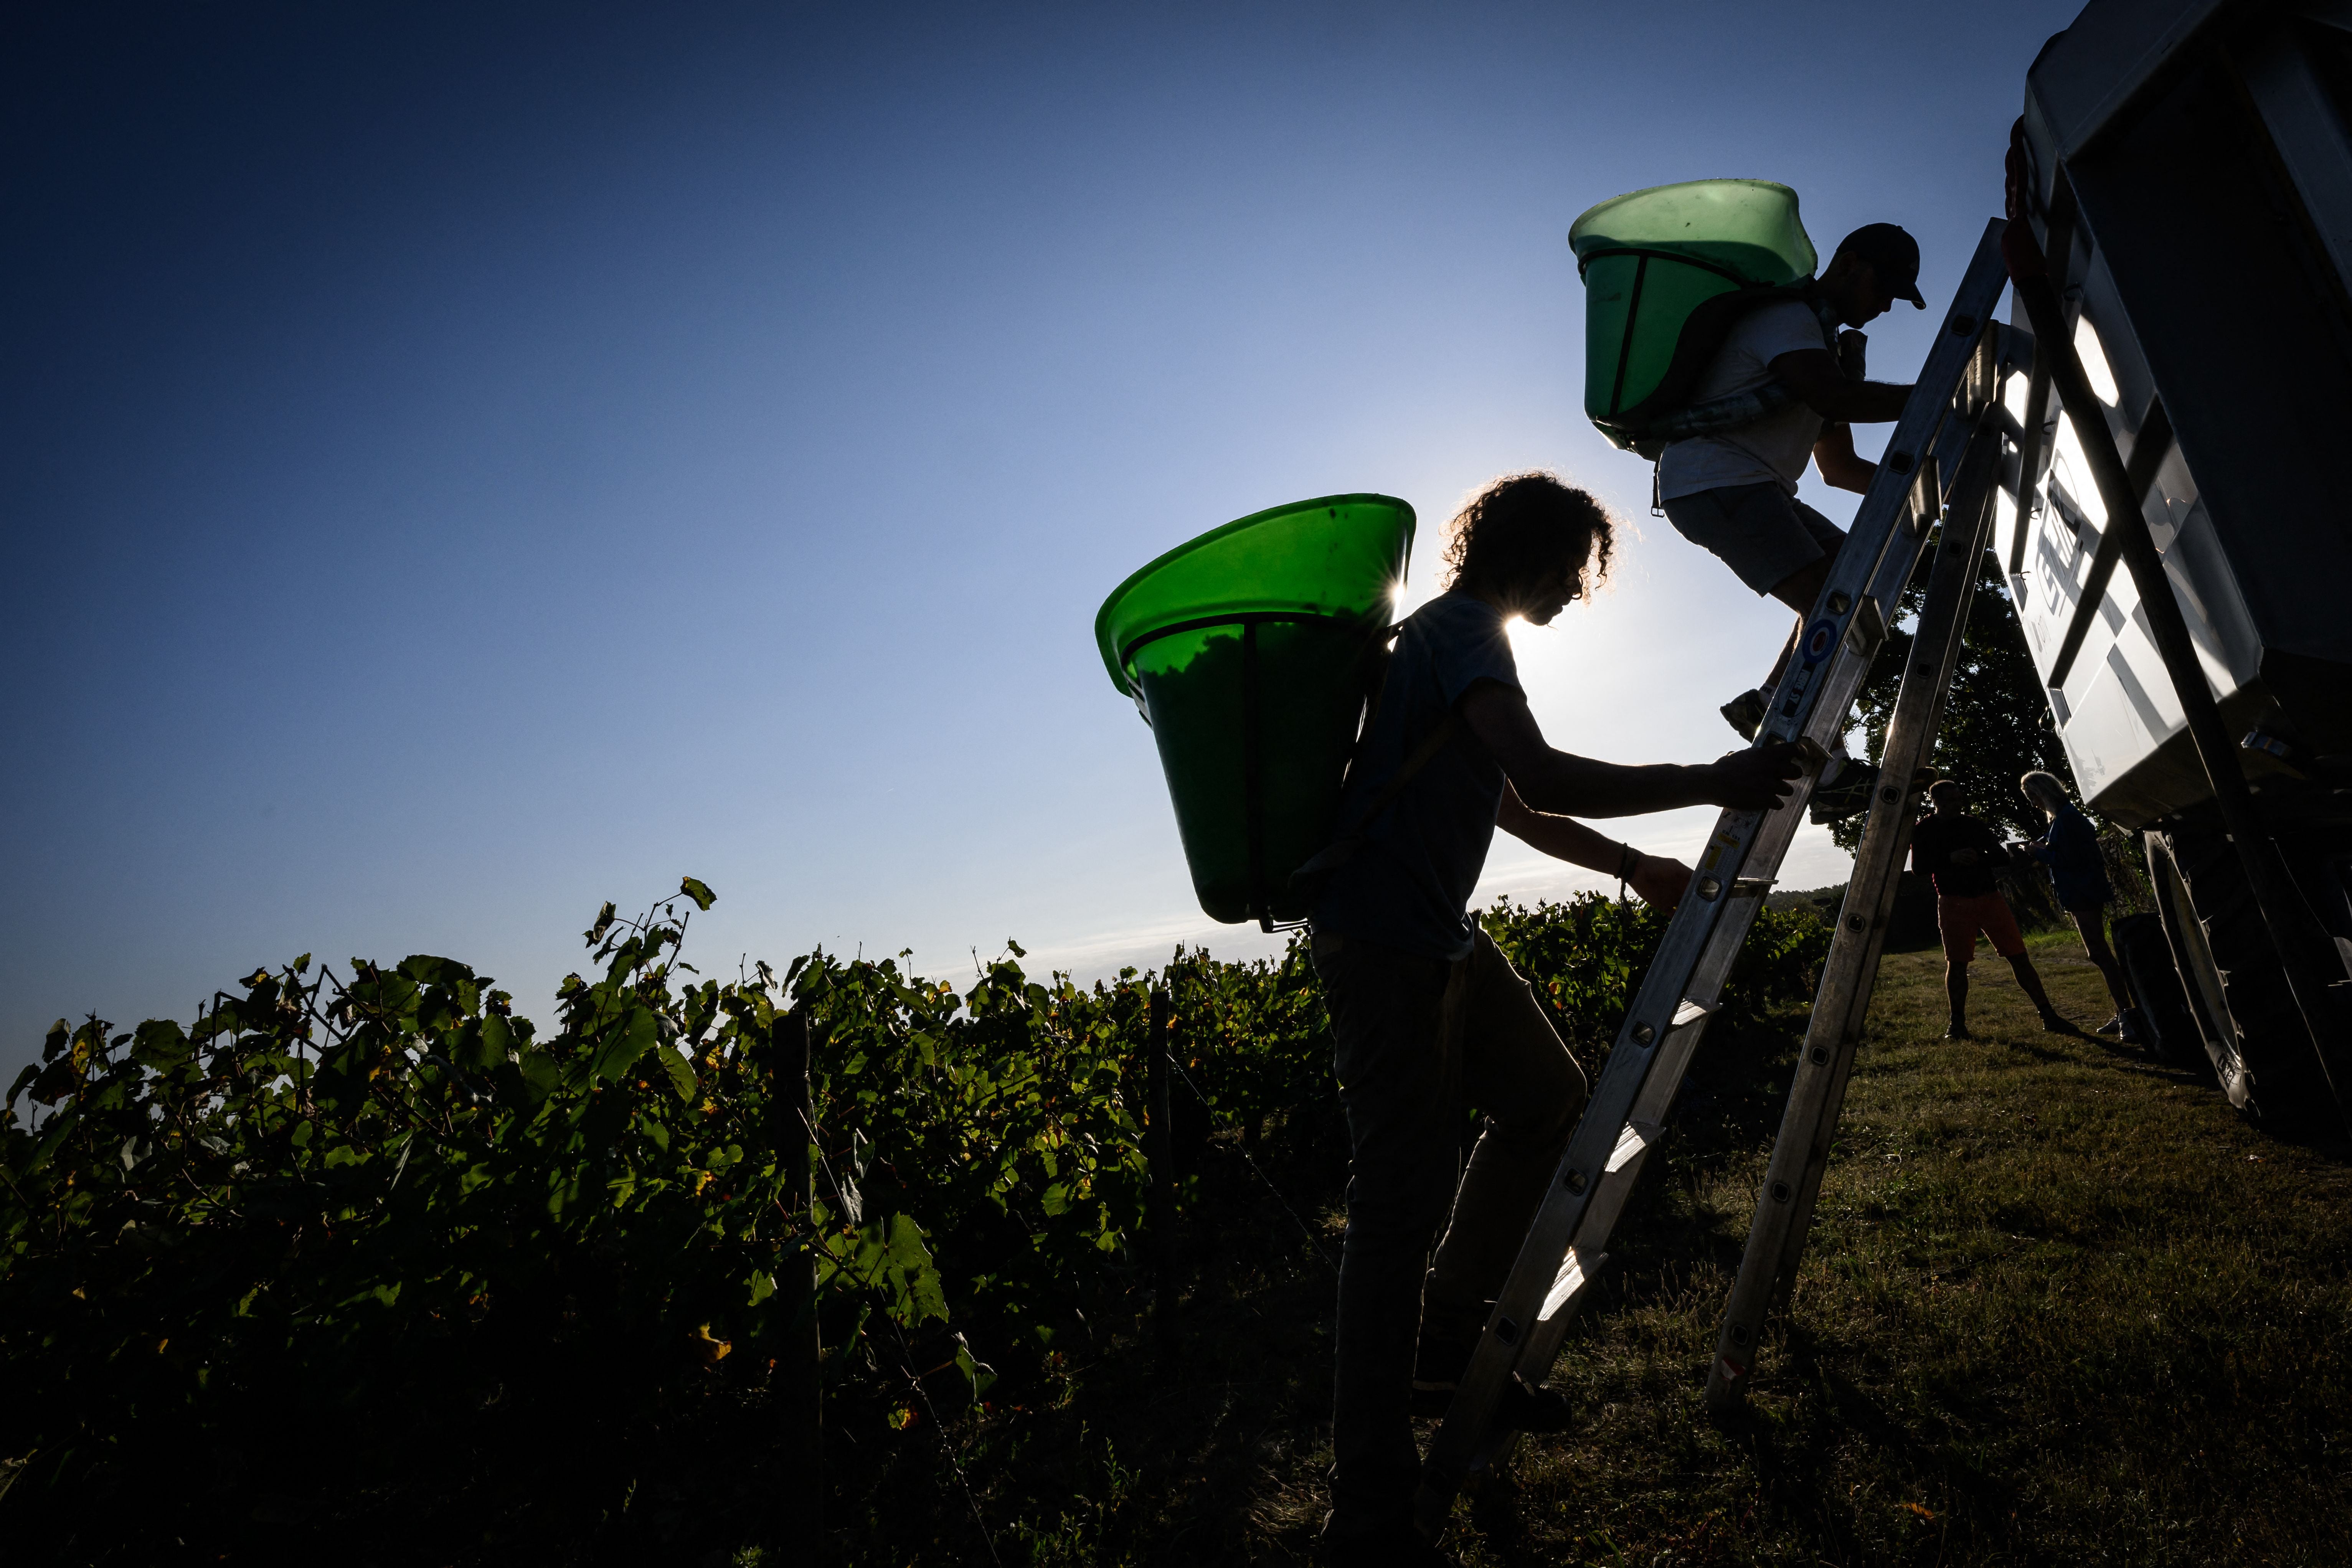 Morning sunlight silhouettes workers as they unload harvested grapes, in a muscadet vineyard, in Chateau-Thebaud, western France, on 13 September